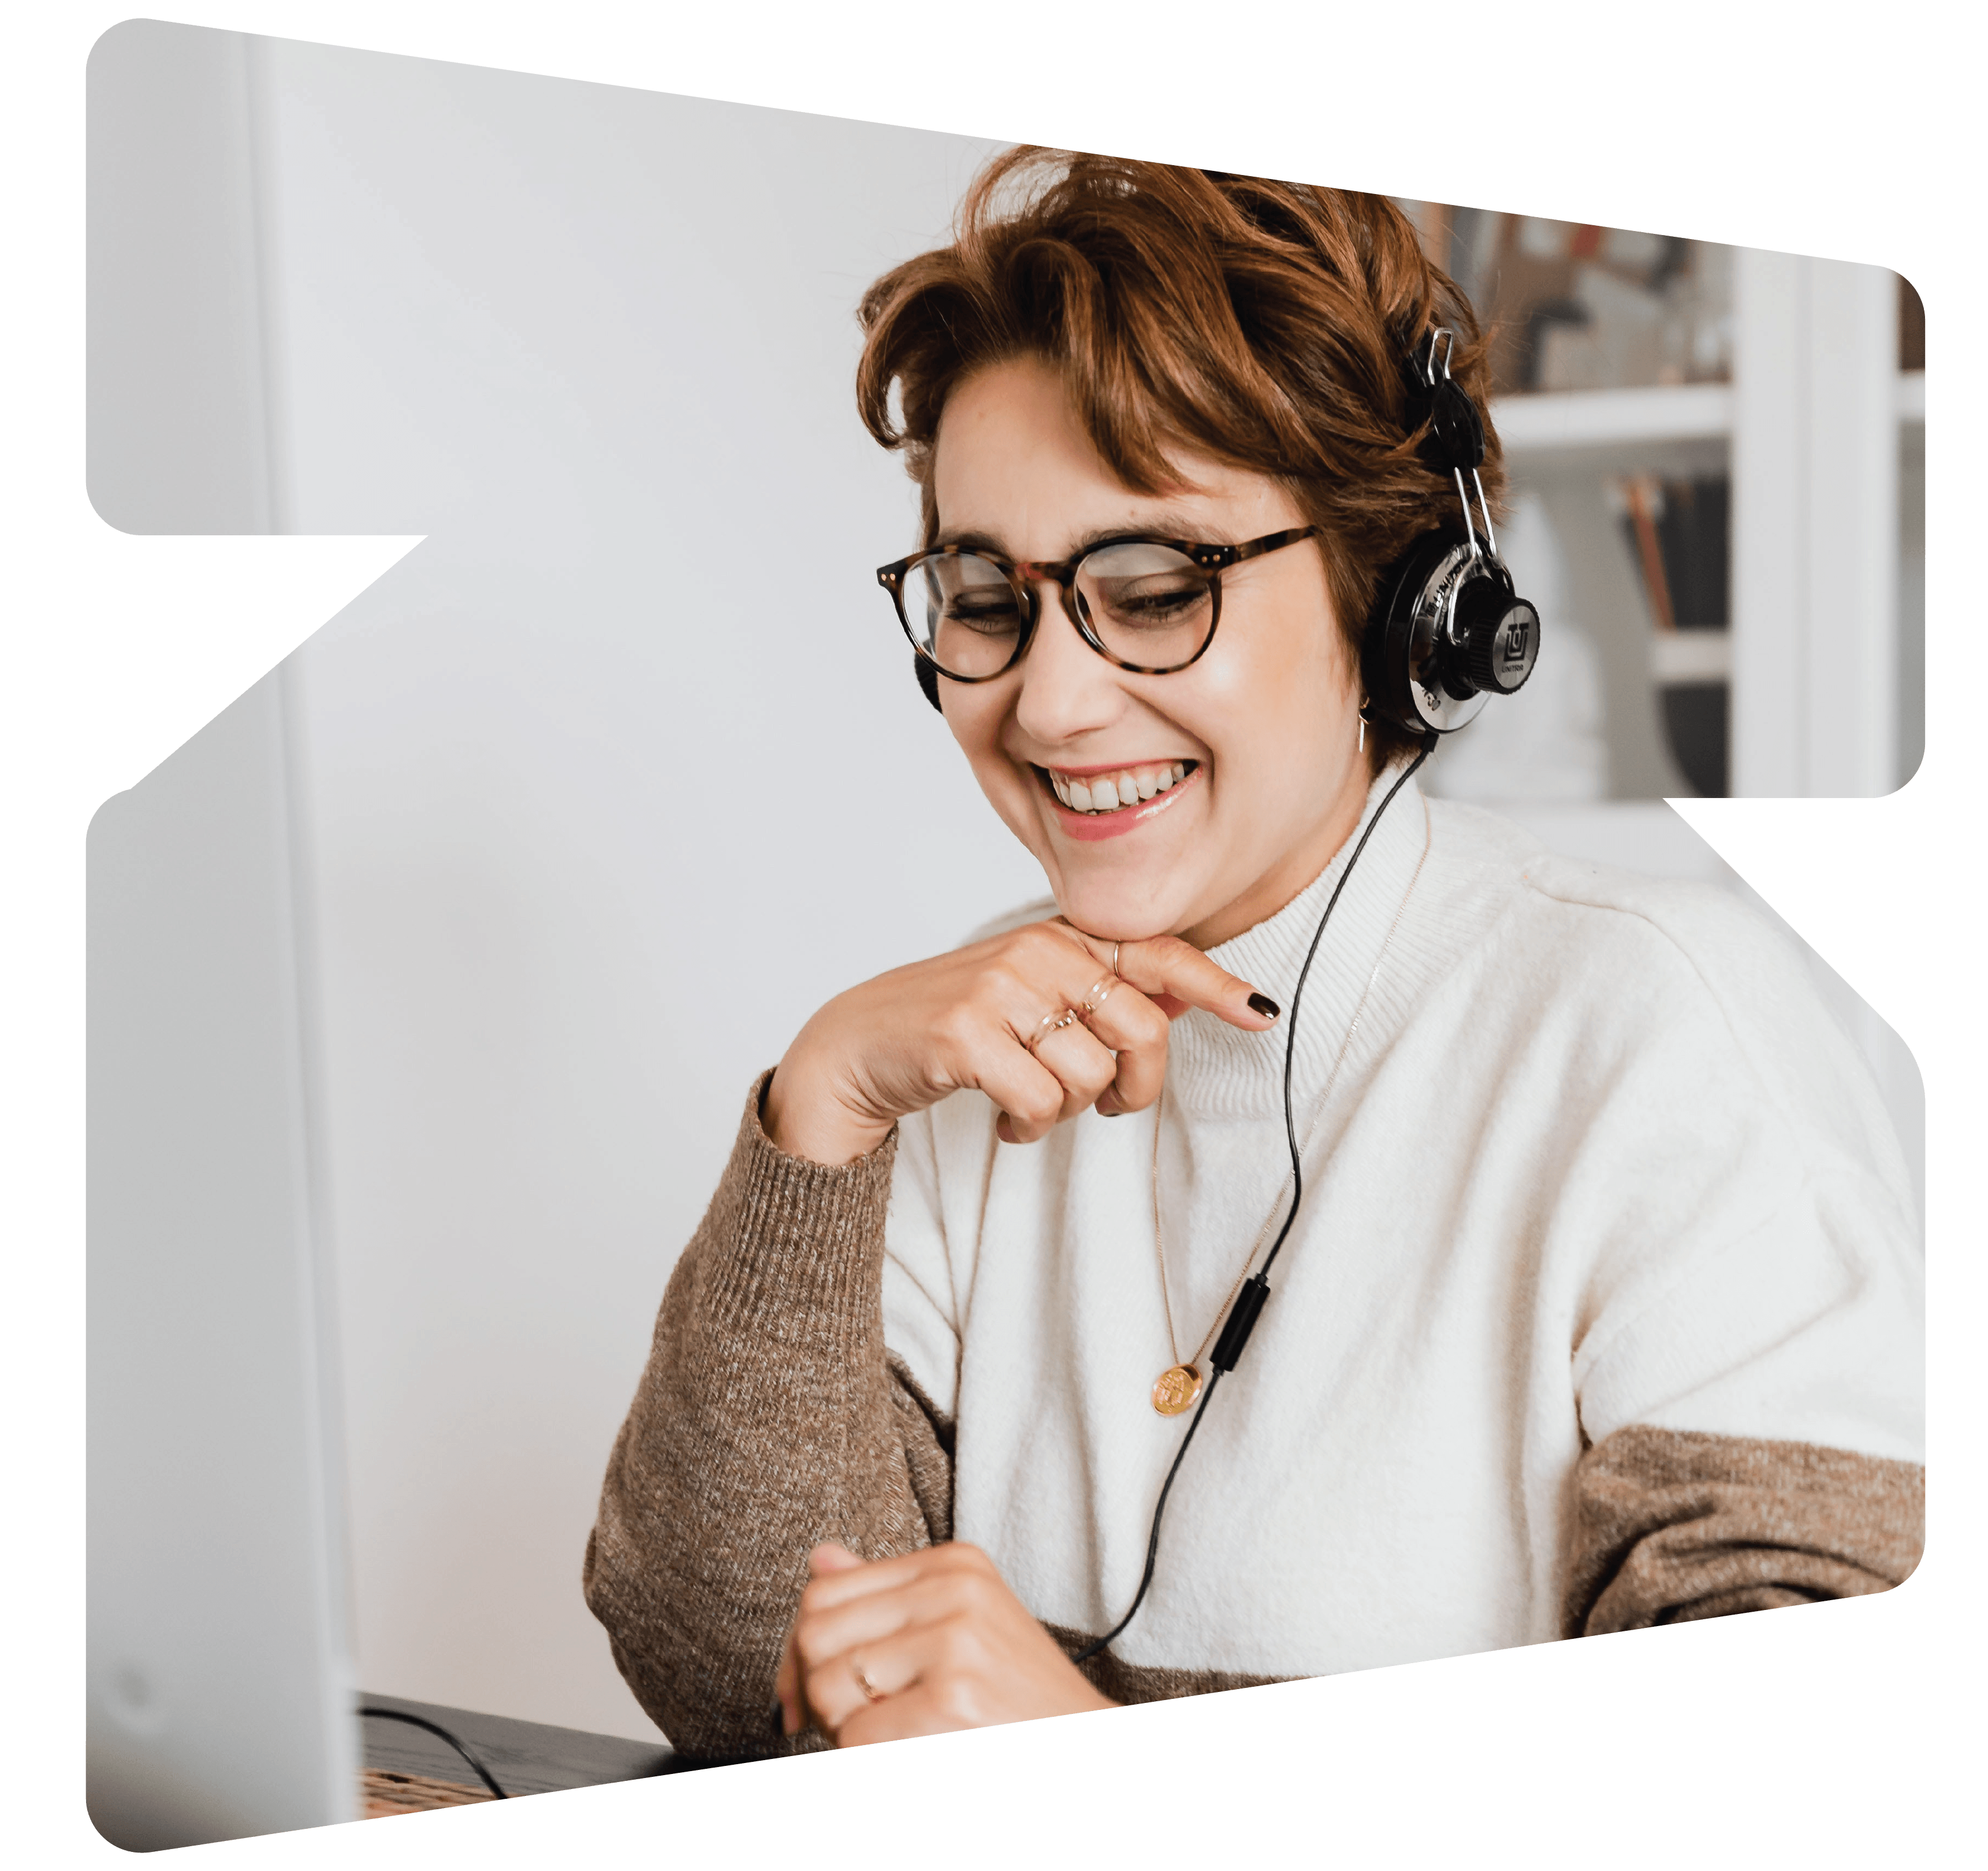 Woman wearing headphones and smiling